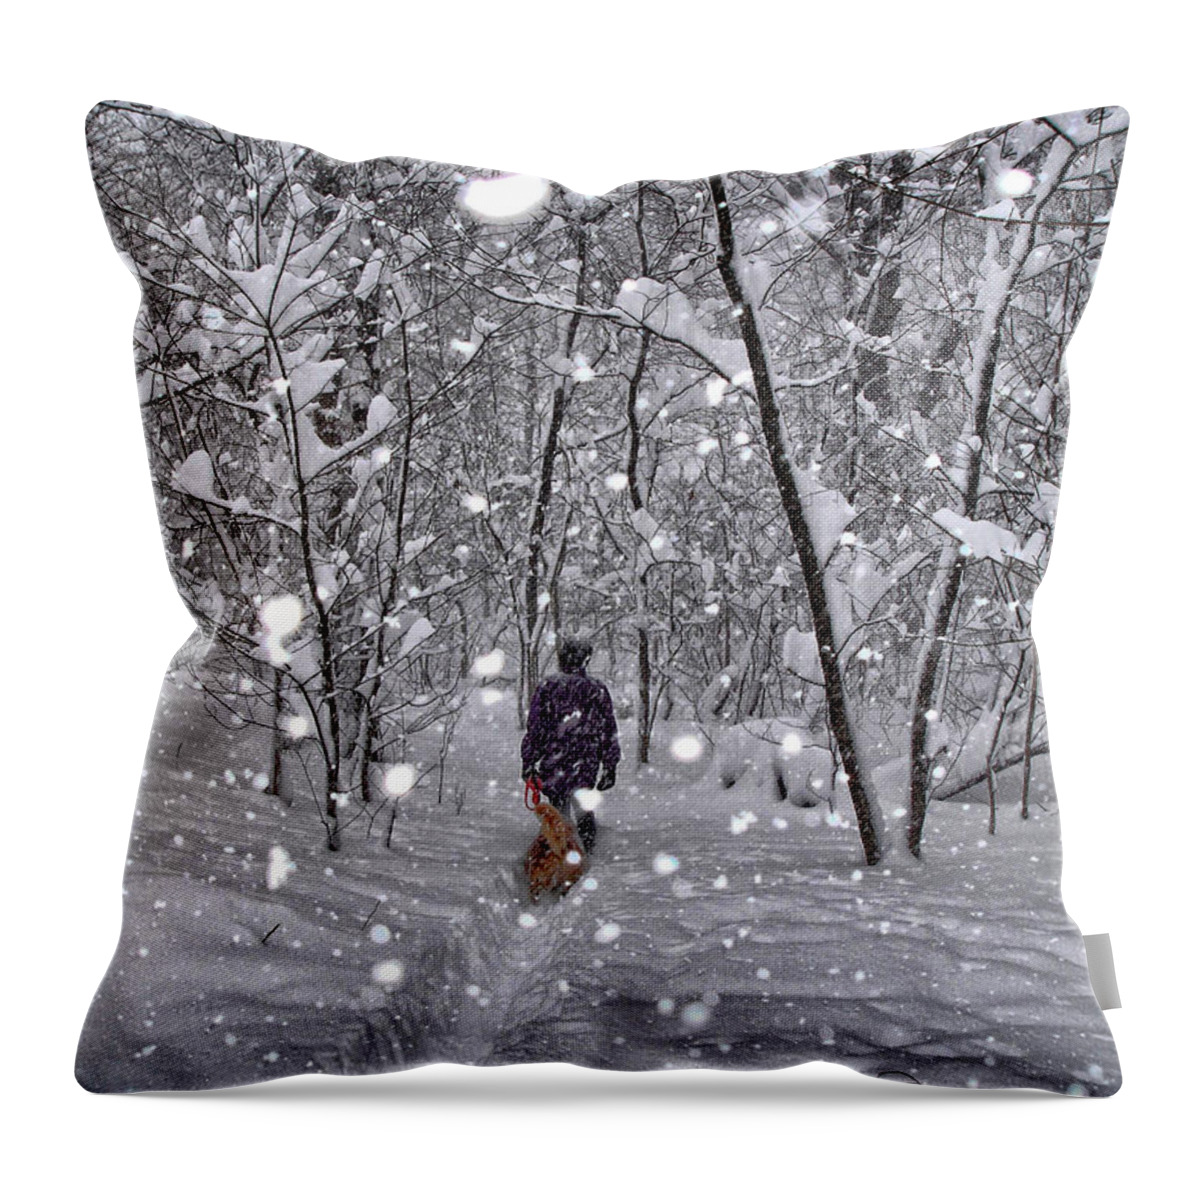 Dog Throw Pillow featuring the photograph Winter Snow In Woods by Russel Considine